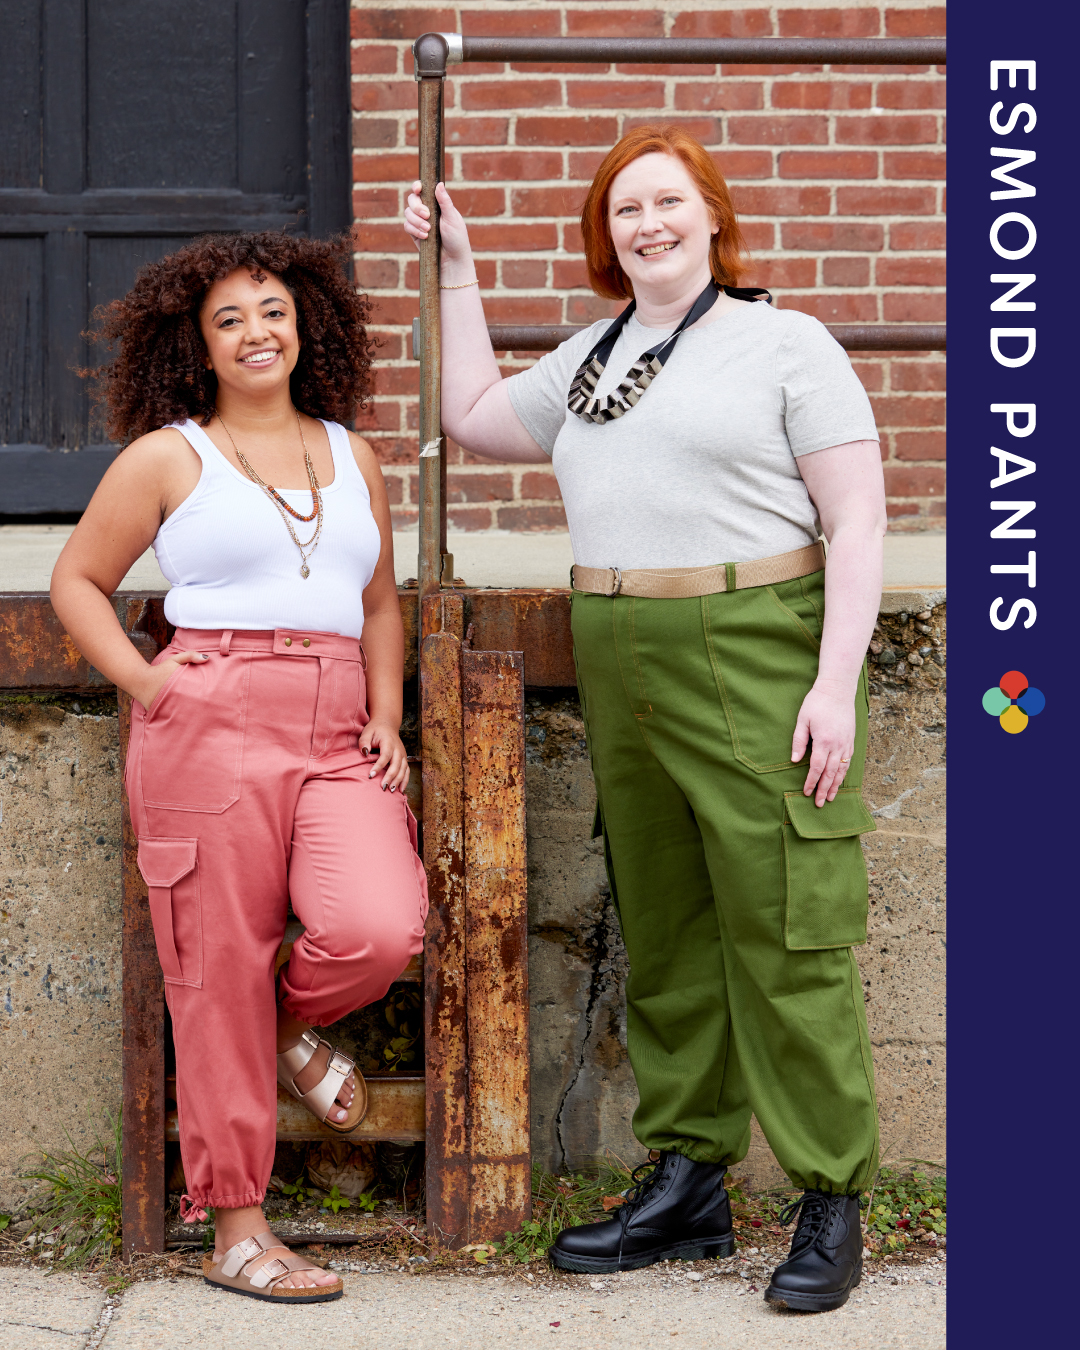 Low-Rise Cargo Pants: Free People The Thing Is Low-Rise Utility Pants, Cargo  Pants Are the Latest Nostalgic Fall Trend We're Excited About